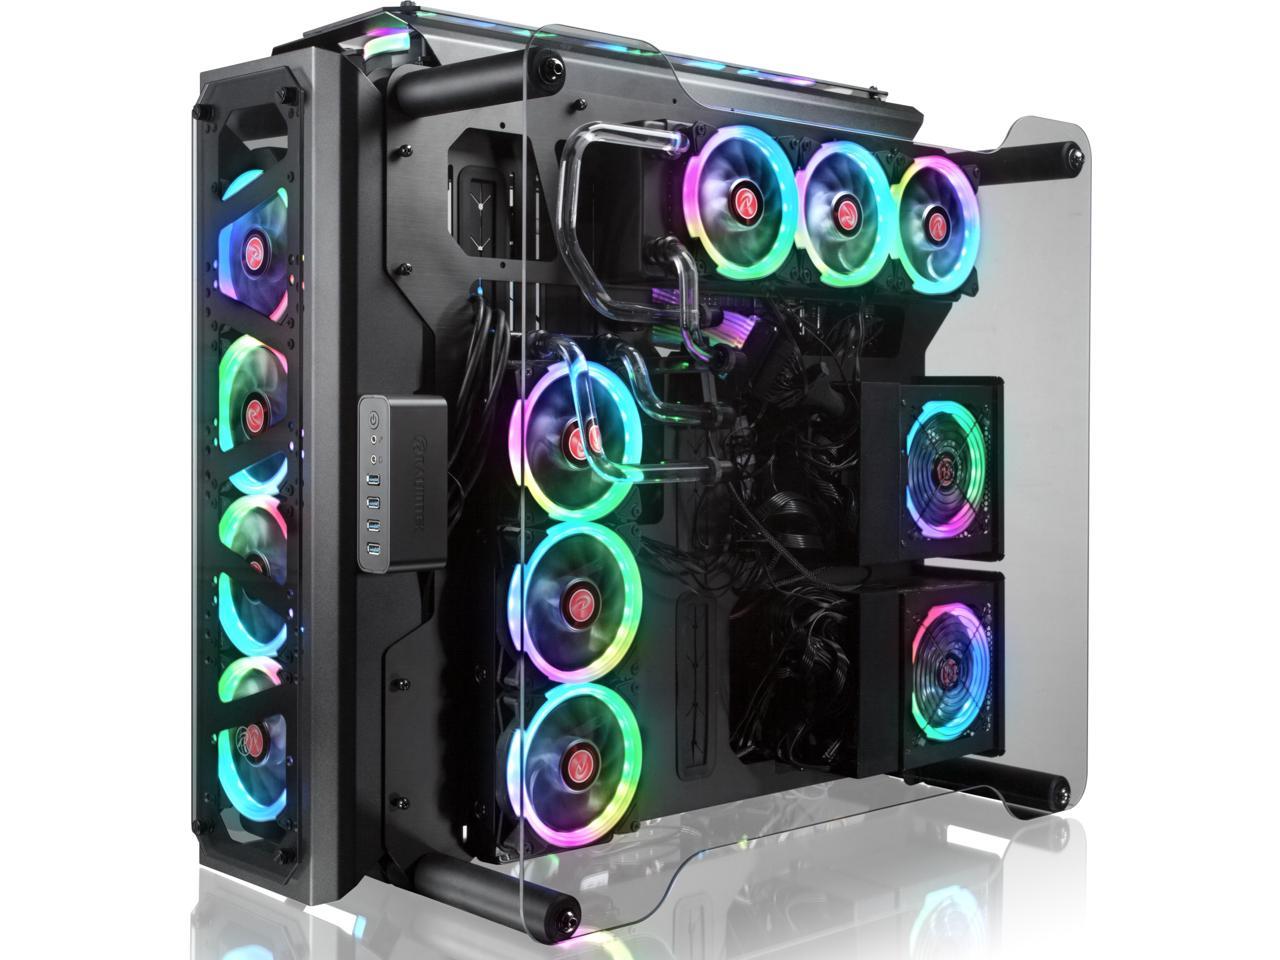 ENYO, a Goliath Chassis of the Open Frame / Benching Case, is designed to fulfil the biggest dream of any high end enthusiast in terms of Water Cooling or Air Cooling with the most powerful component